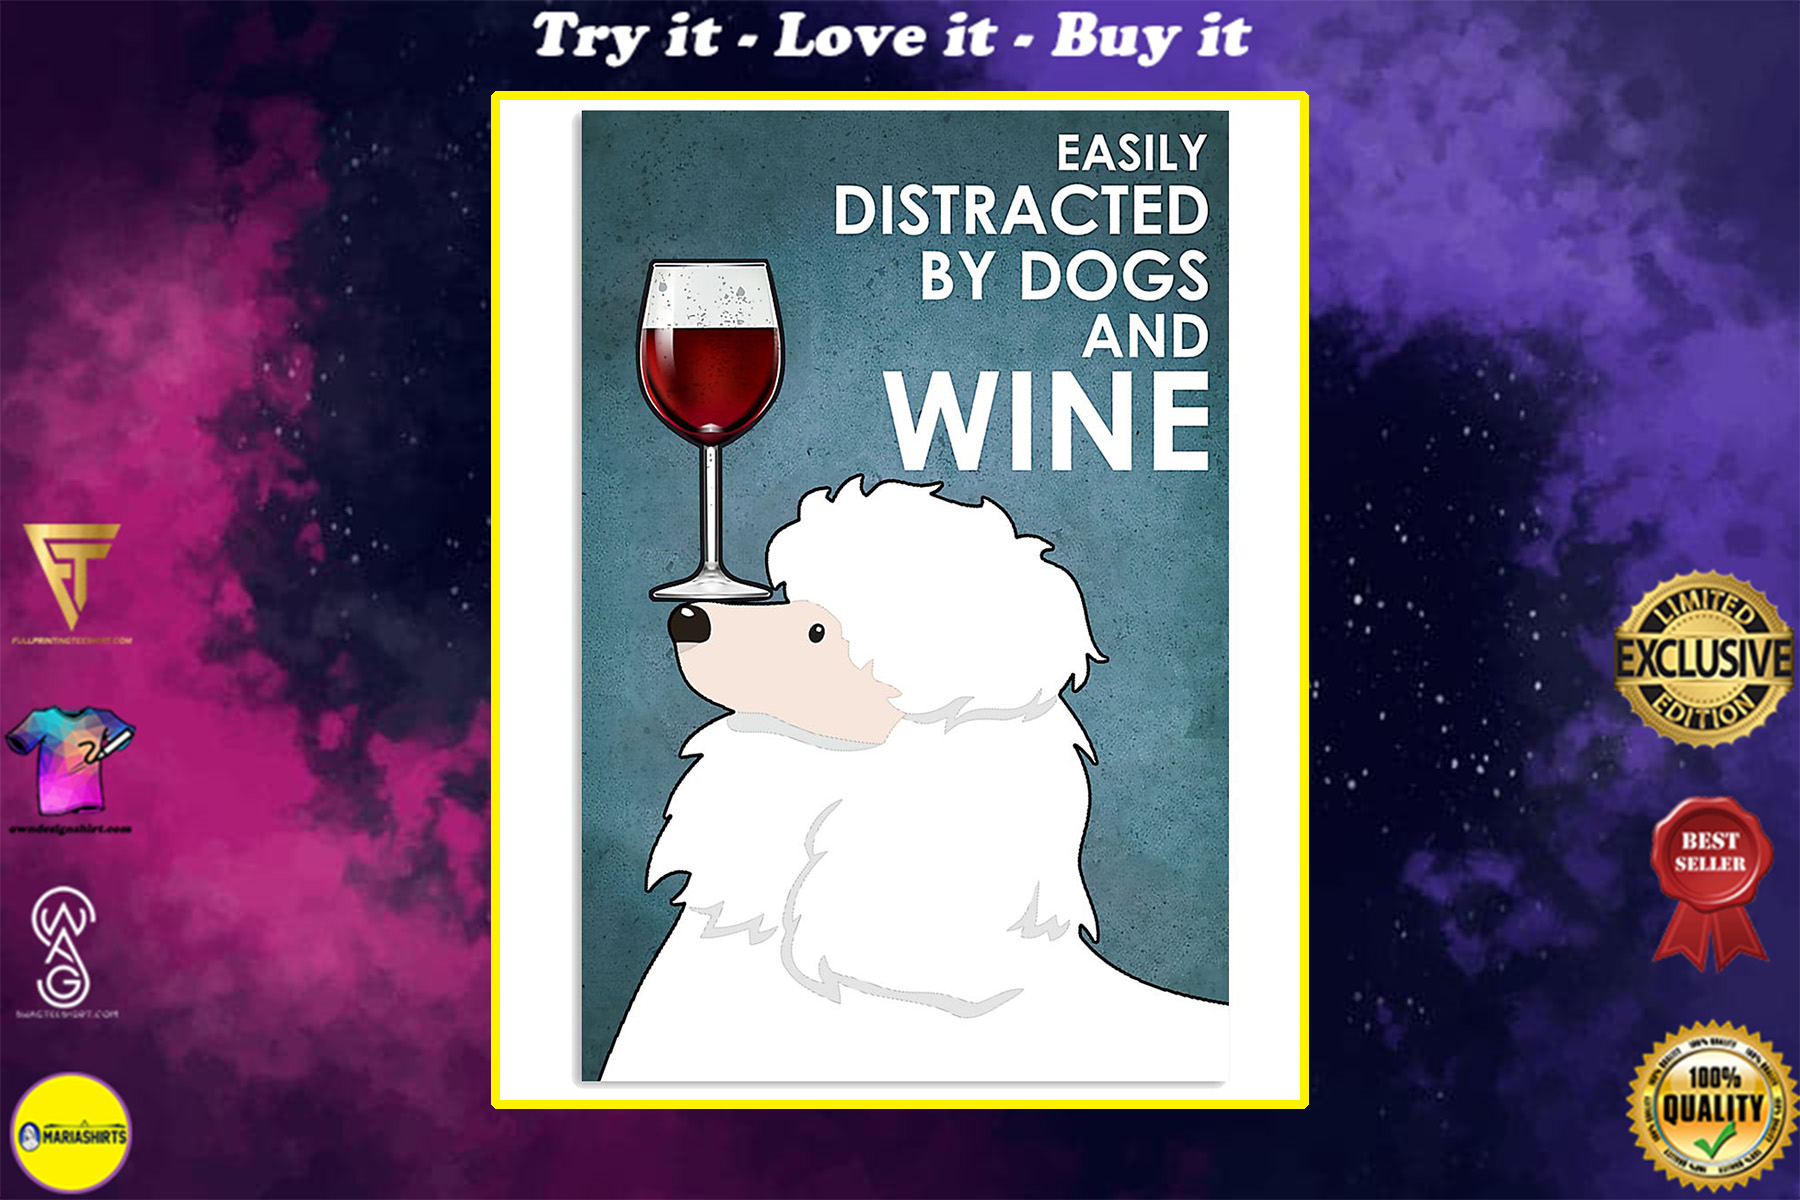 dog white poodle easily distracted by dogs and wine poster